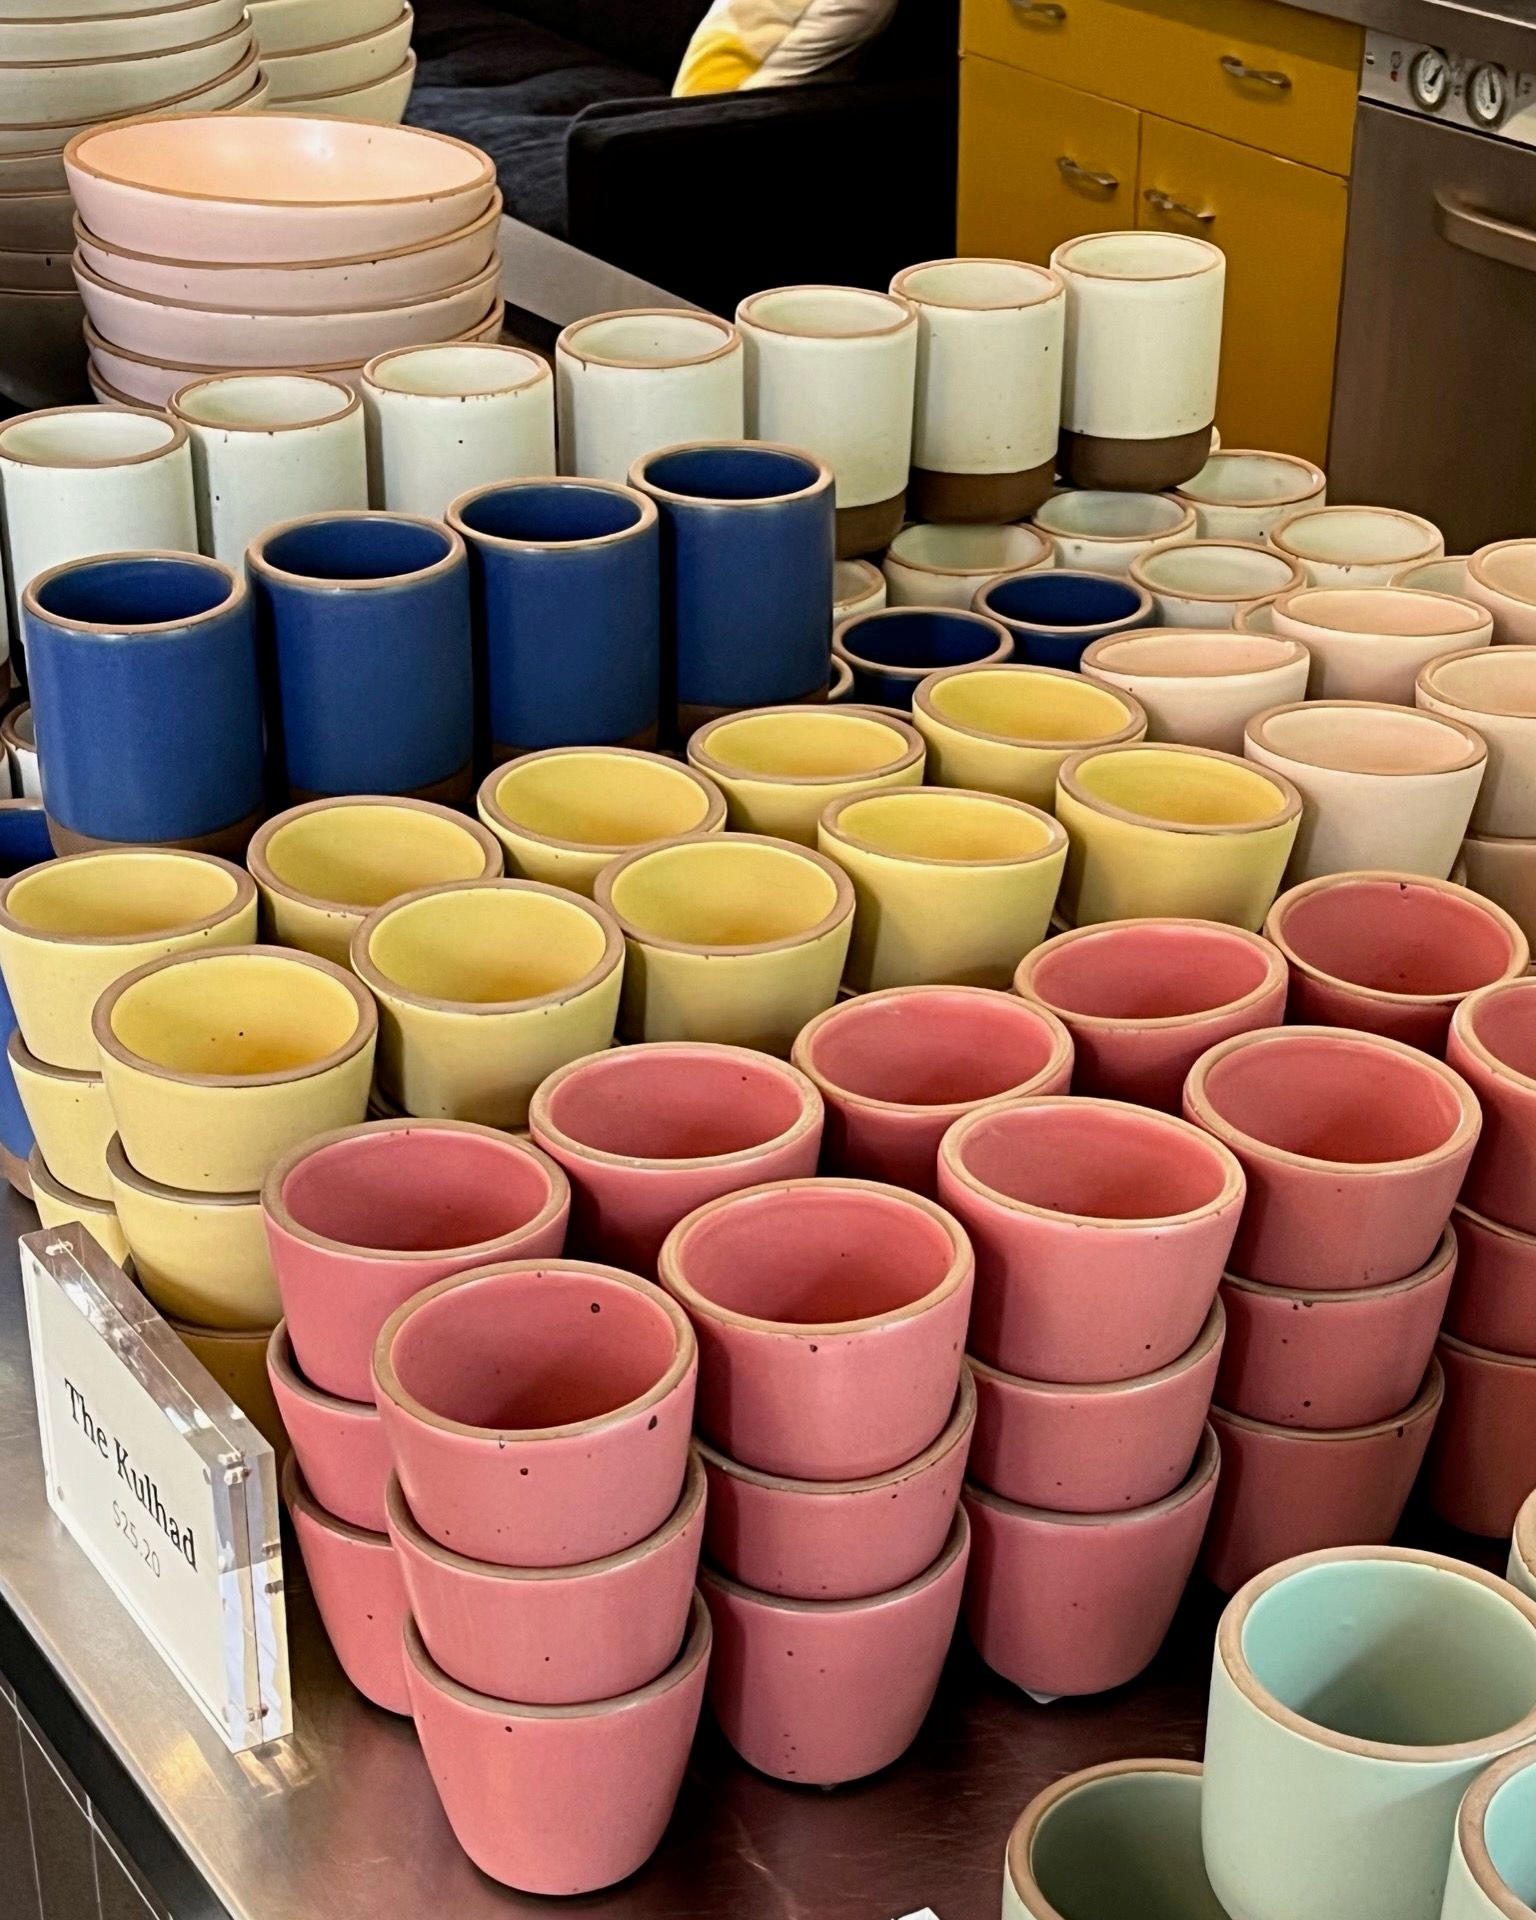 In a retail setting, there are large stacks of ceramic cups and mugs in all different colors of the rainbow